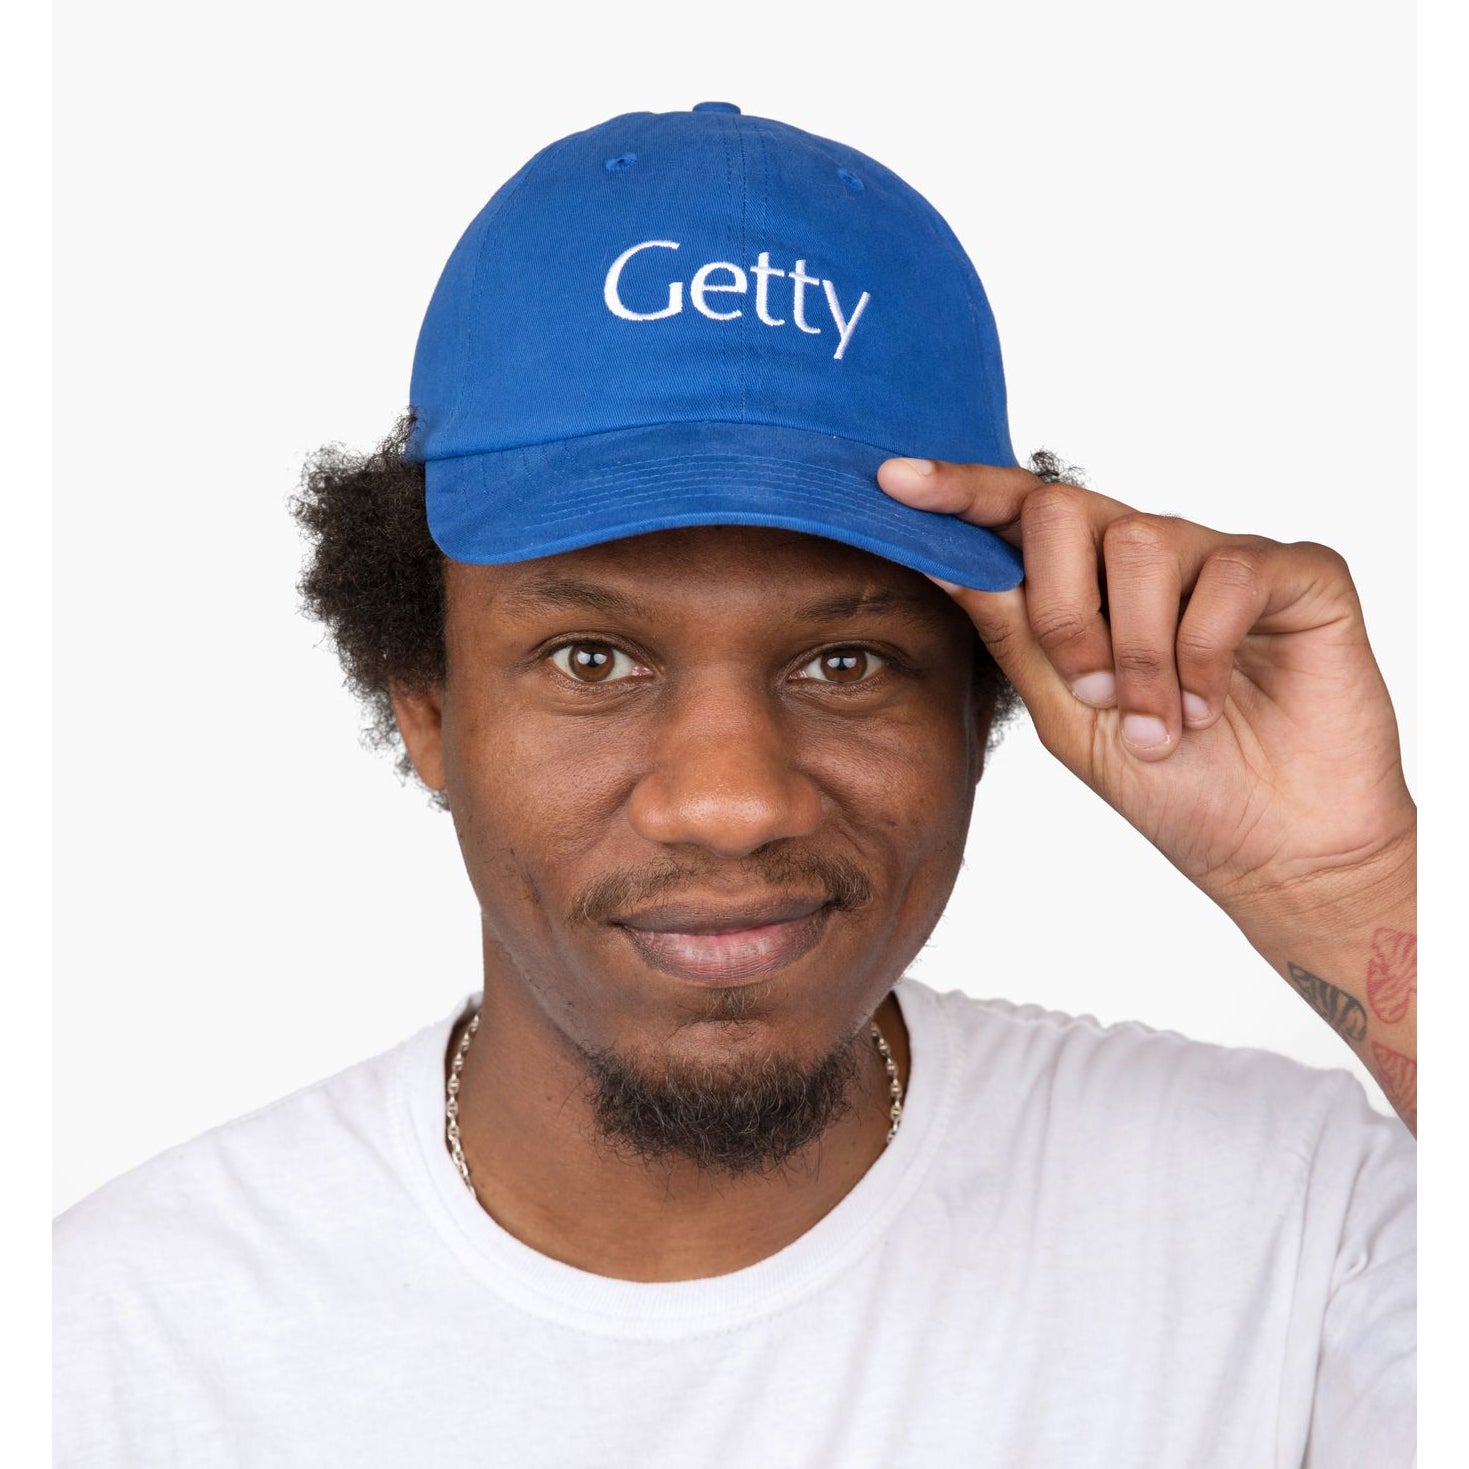 Getty Embroidered Logo Cap - Blue - Getty Museum Store